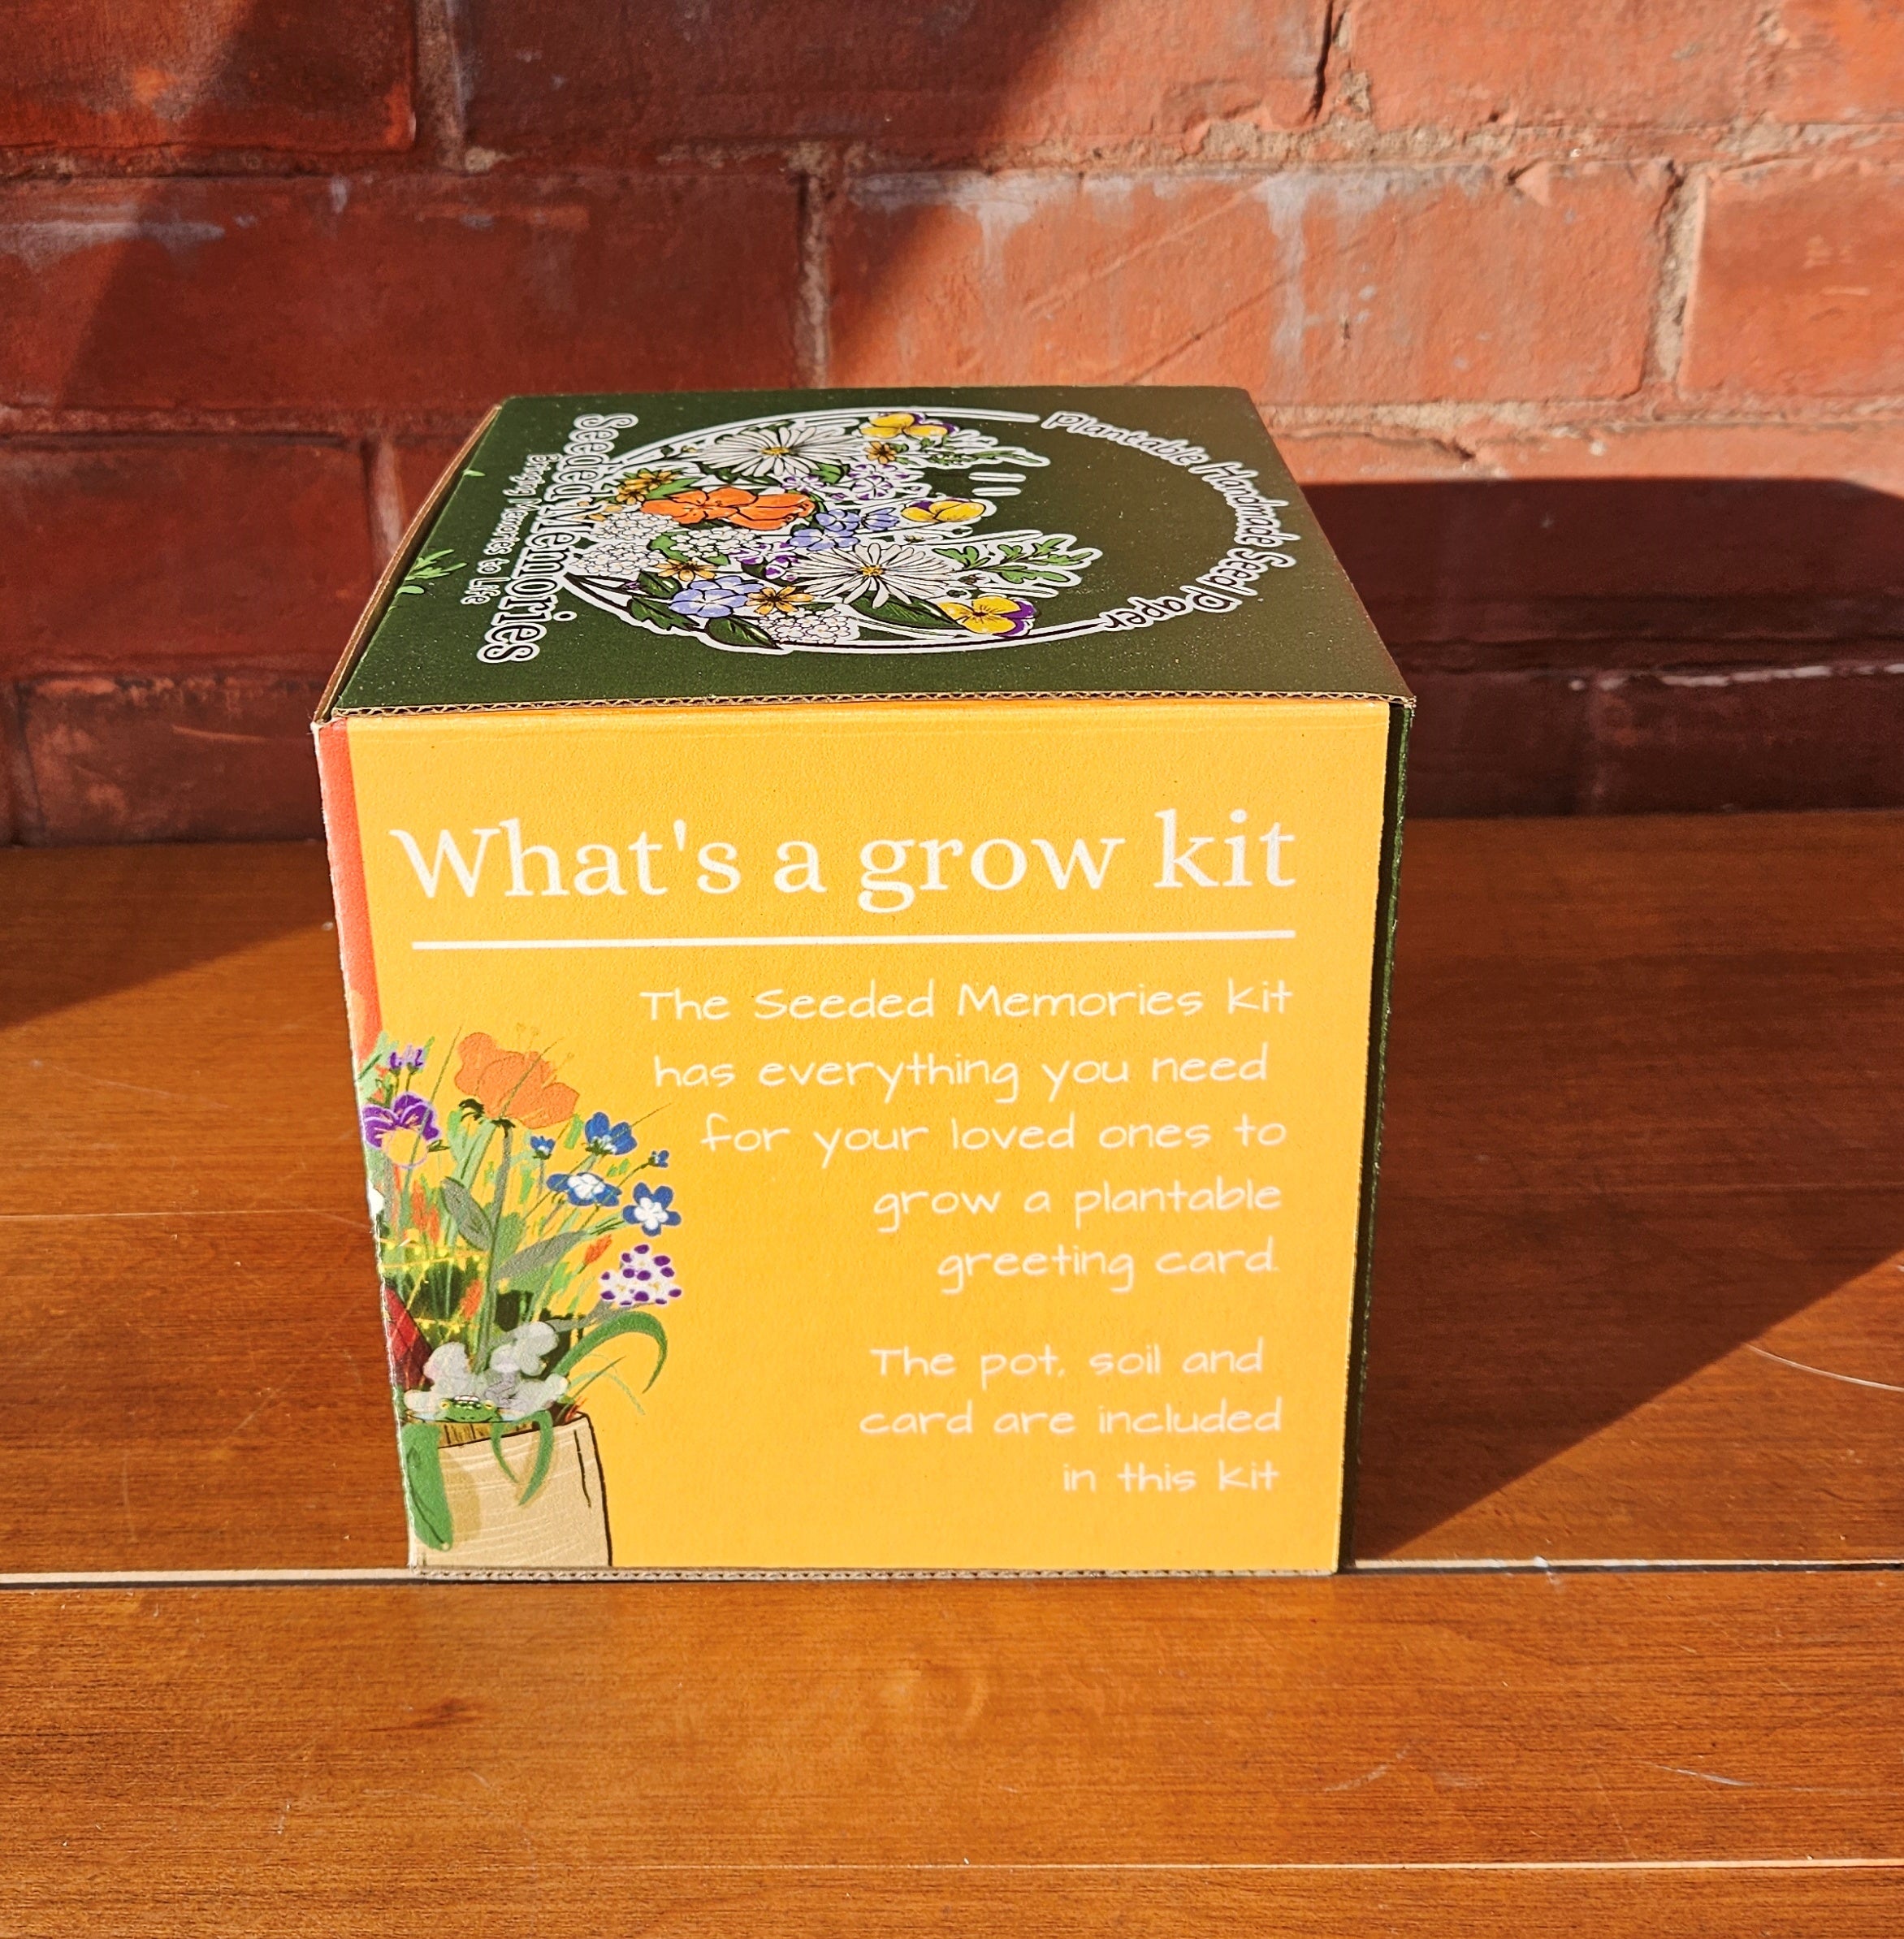 The Grow your own kit!